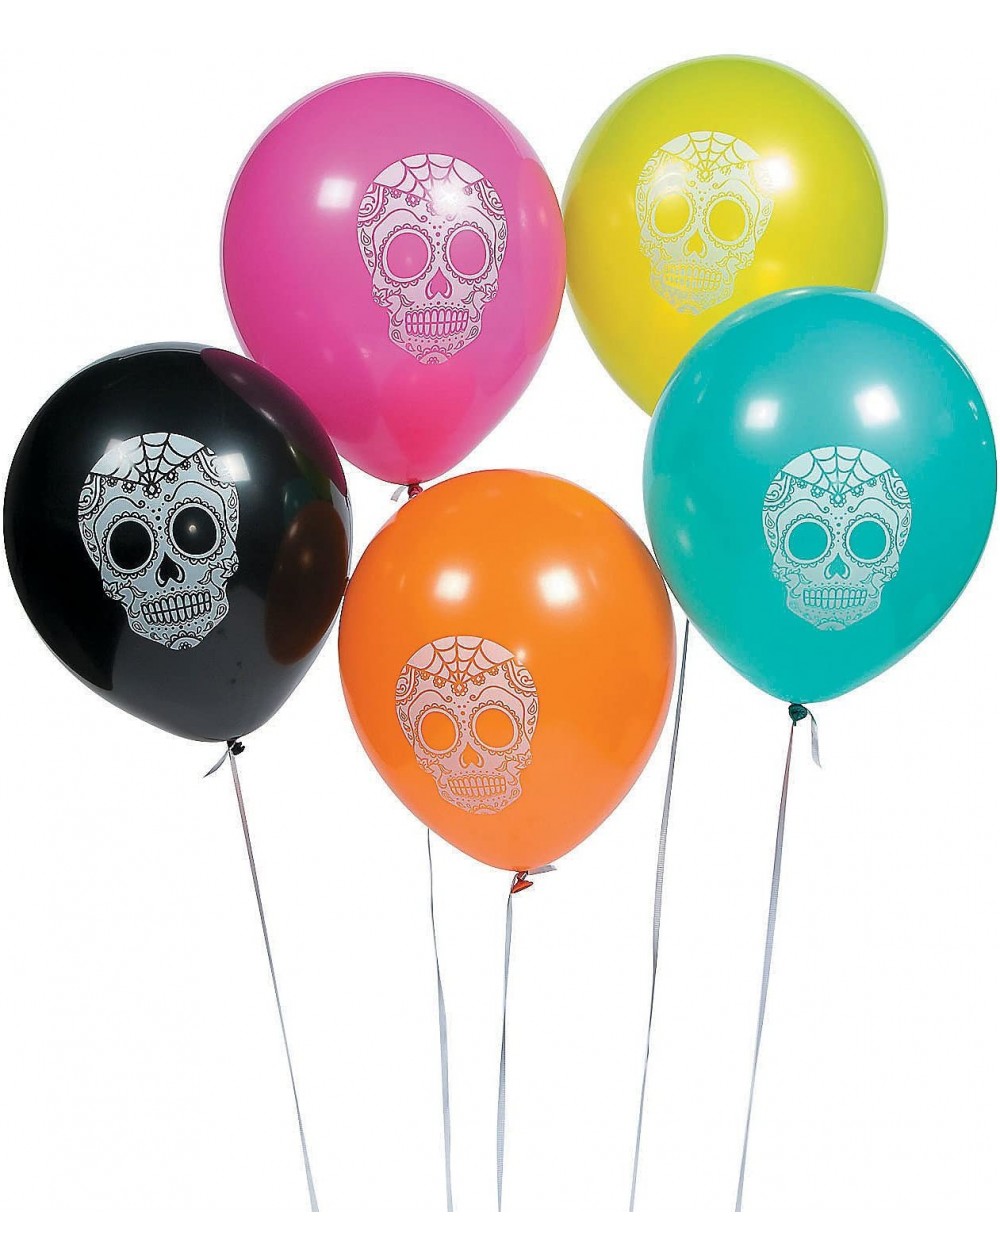 Balloons Day Of The Dead Latex Balloons (12 Pack) Party Decor - CR185OIWWX5 $13.75